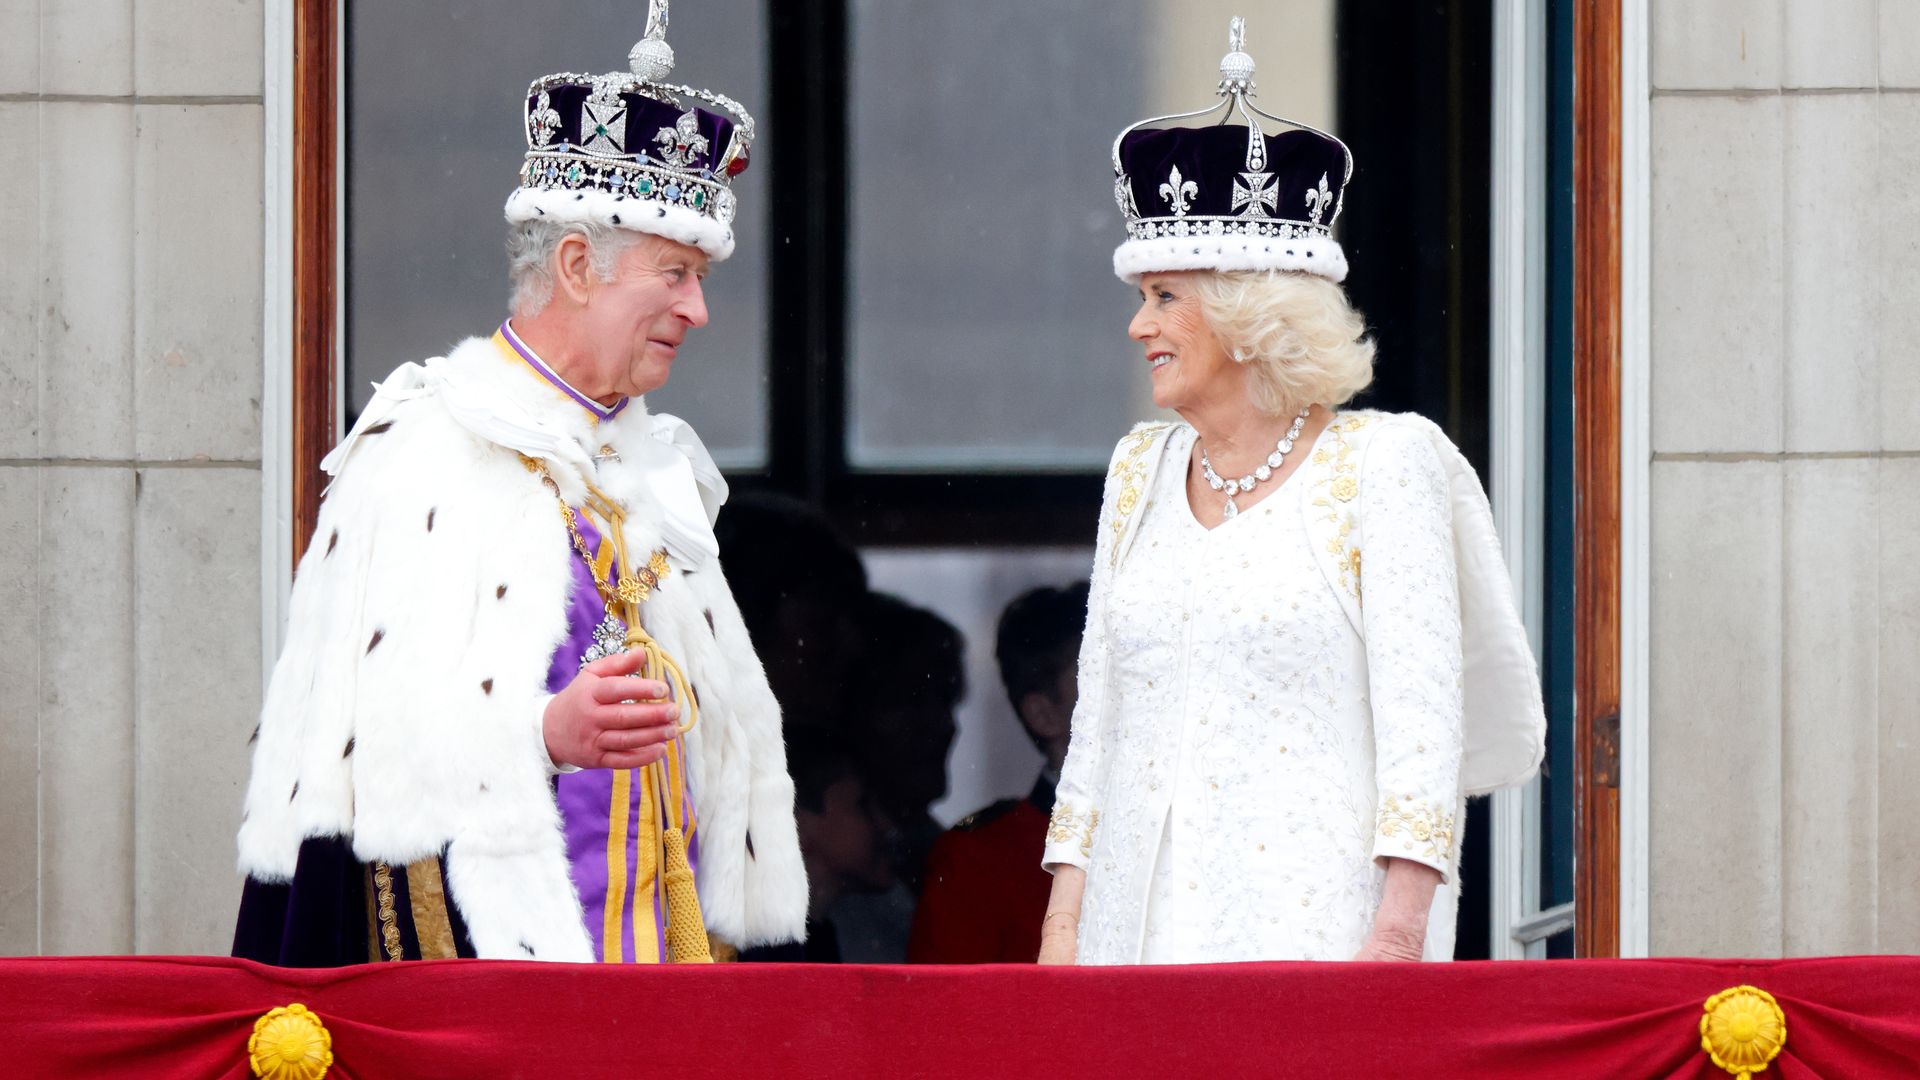 King Charles III and Queen Camilla watch an RAF flypast from the balcony of Buckingham Palace following their coronation at Westminster Abbey on May 6, 2023 in London, England. The Coronation of Charles III and his wife, Camilla, as King and Queen of the 